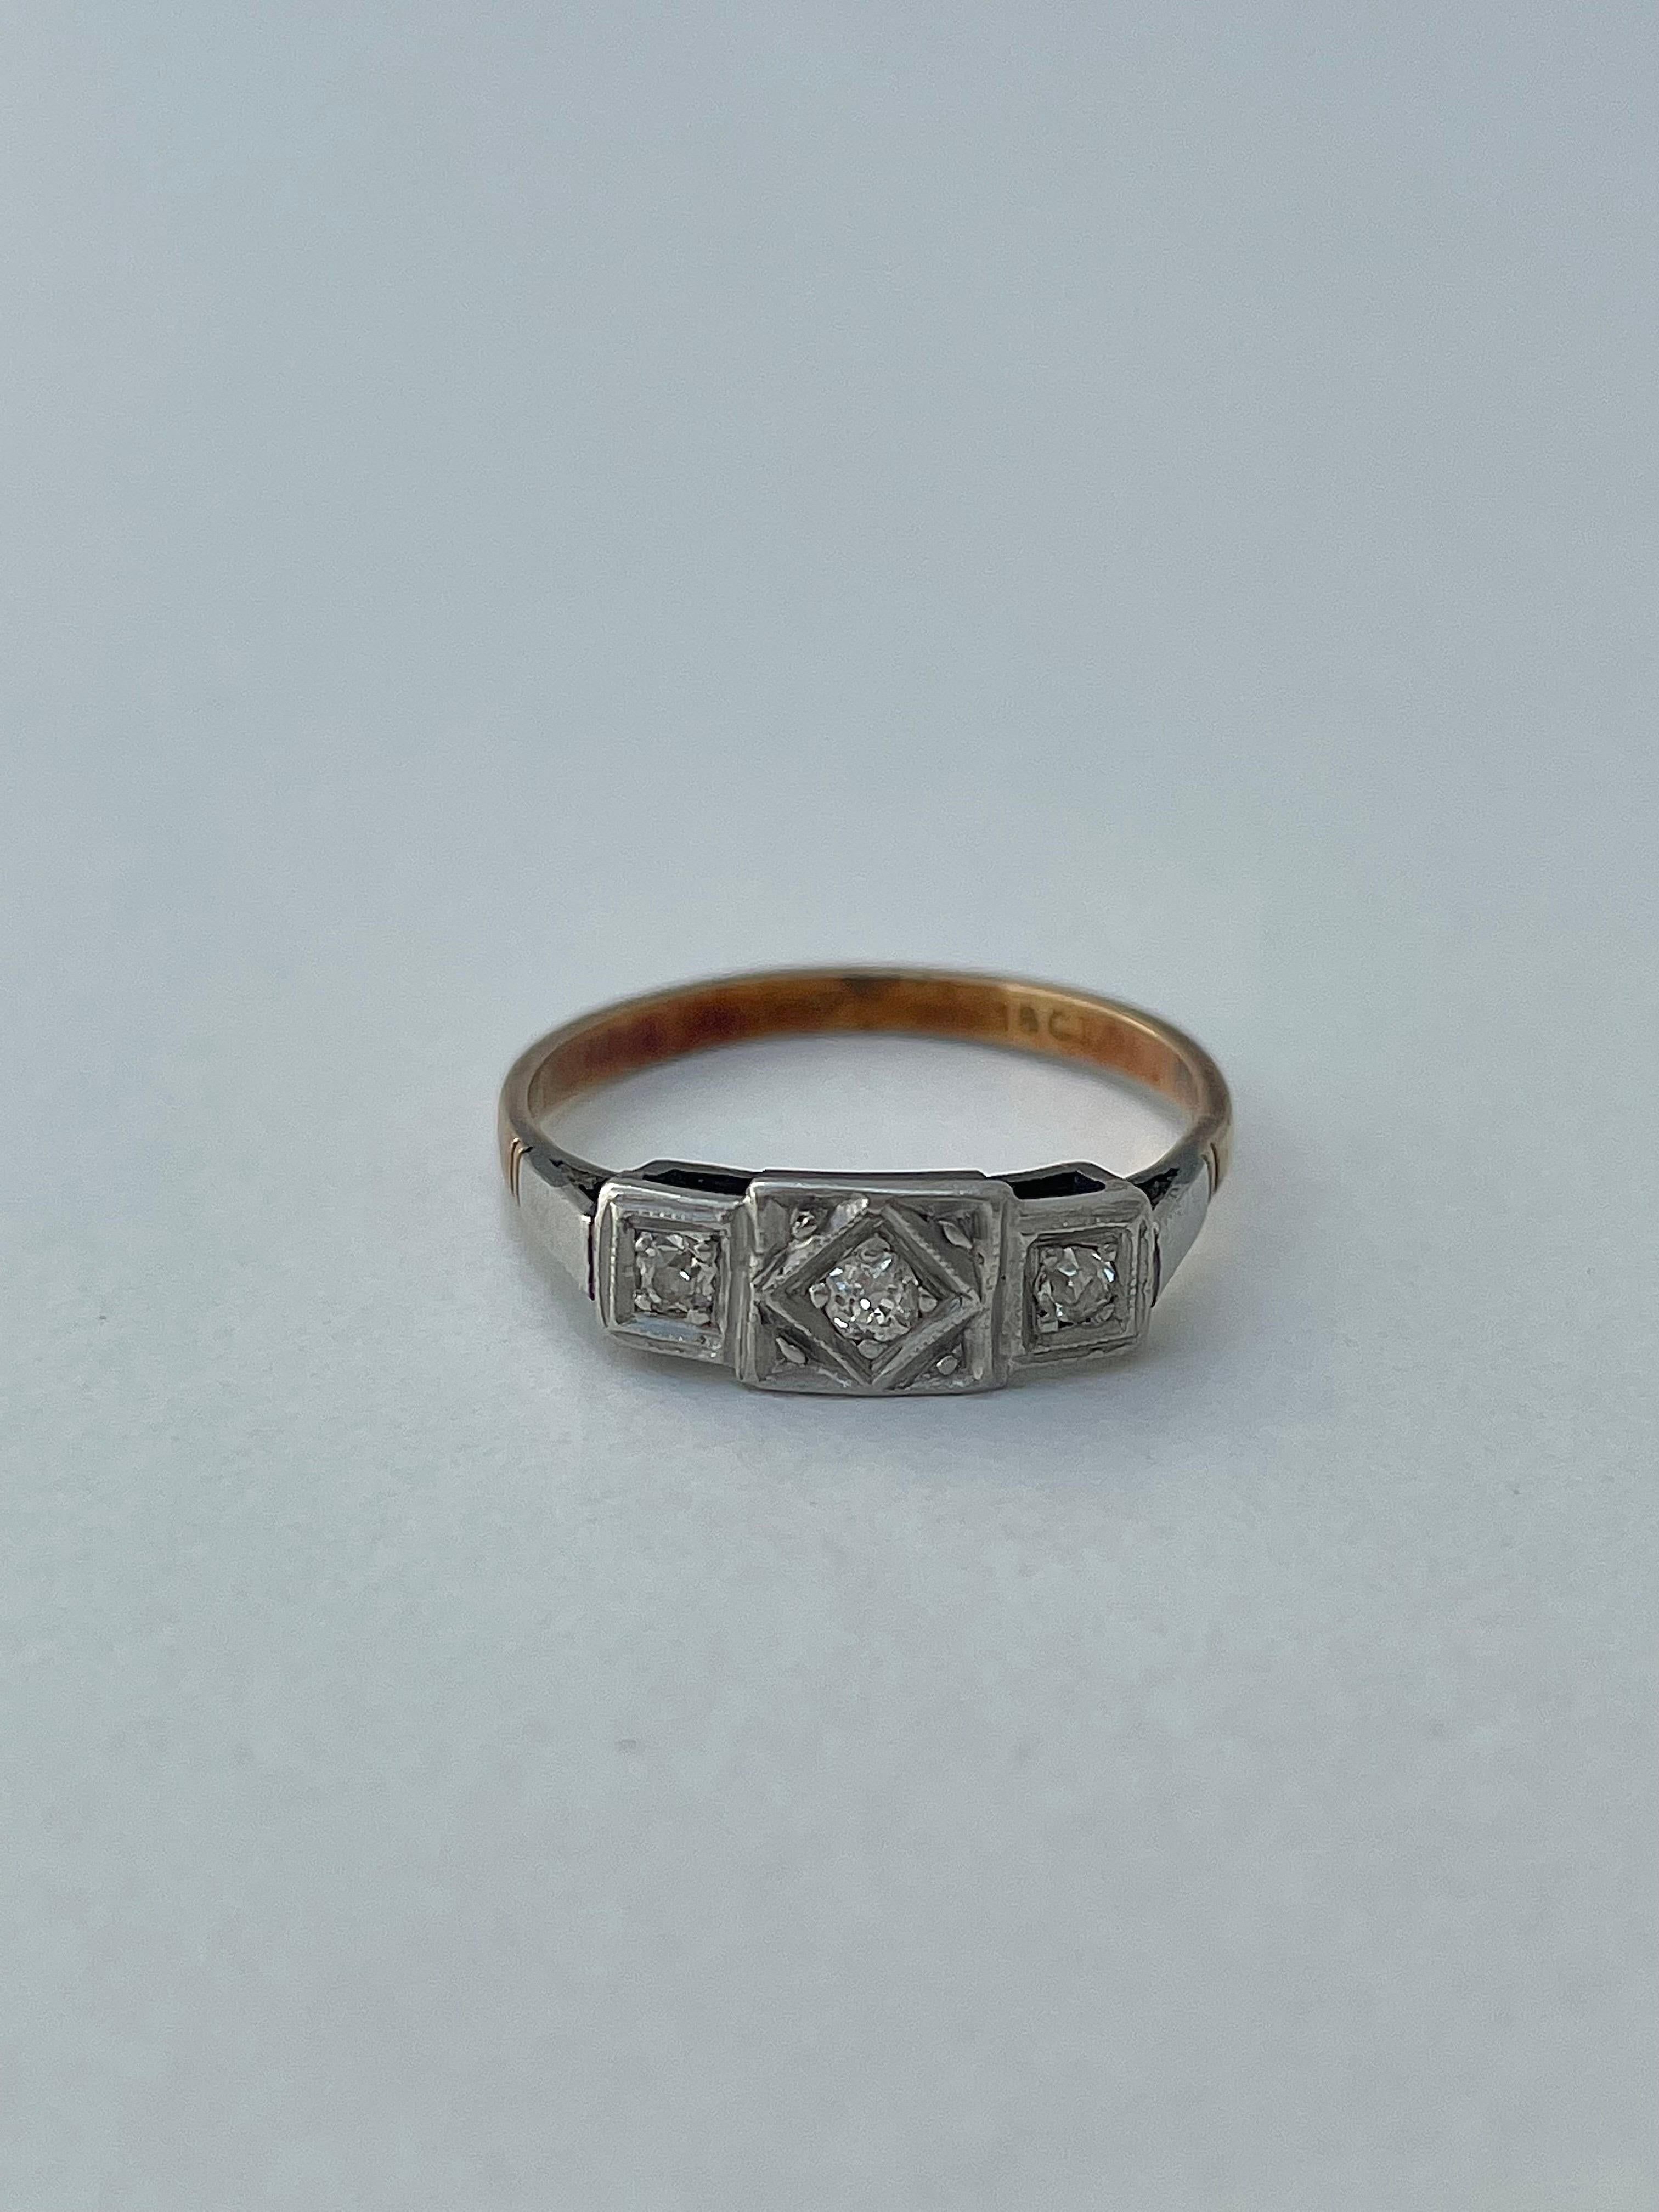 Art Deco Diamond 18ct & Platinum Ring

sweet and detailed so nicely, precious ring 

The item comes without the box in the photos but will be presented in a  gift box

Measurements: weight 2.56g, size UK N1/2, head of ring 12.5mm x 5.3mm, height off